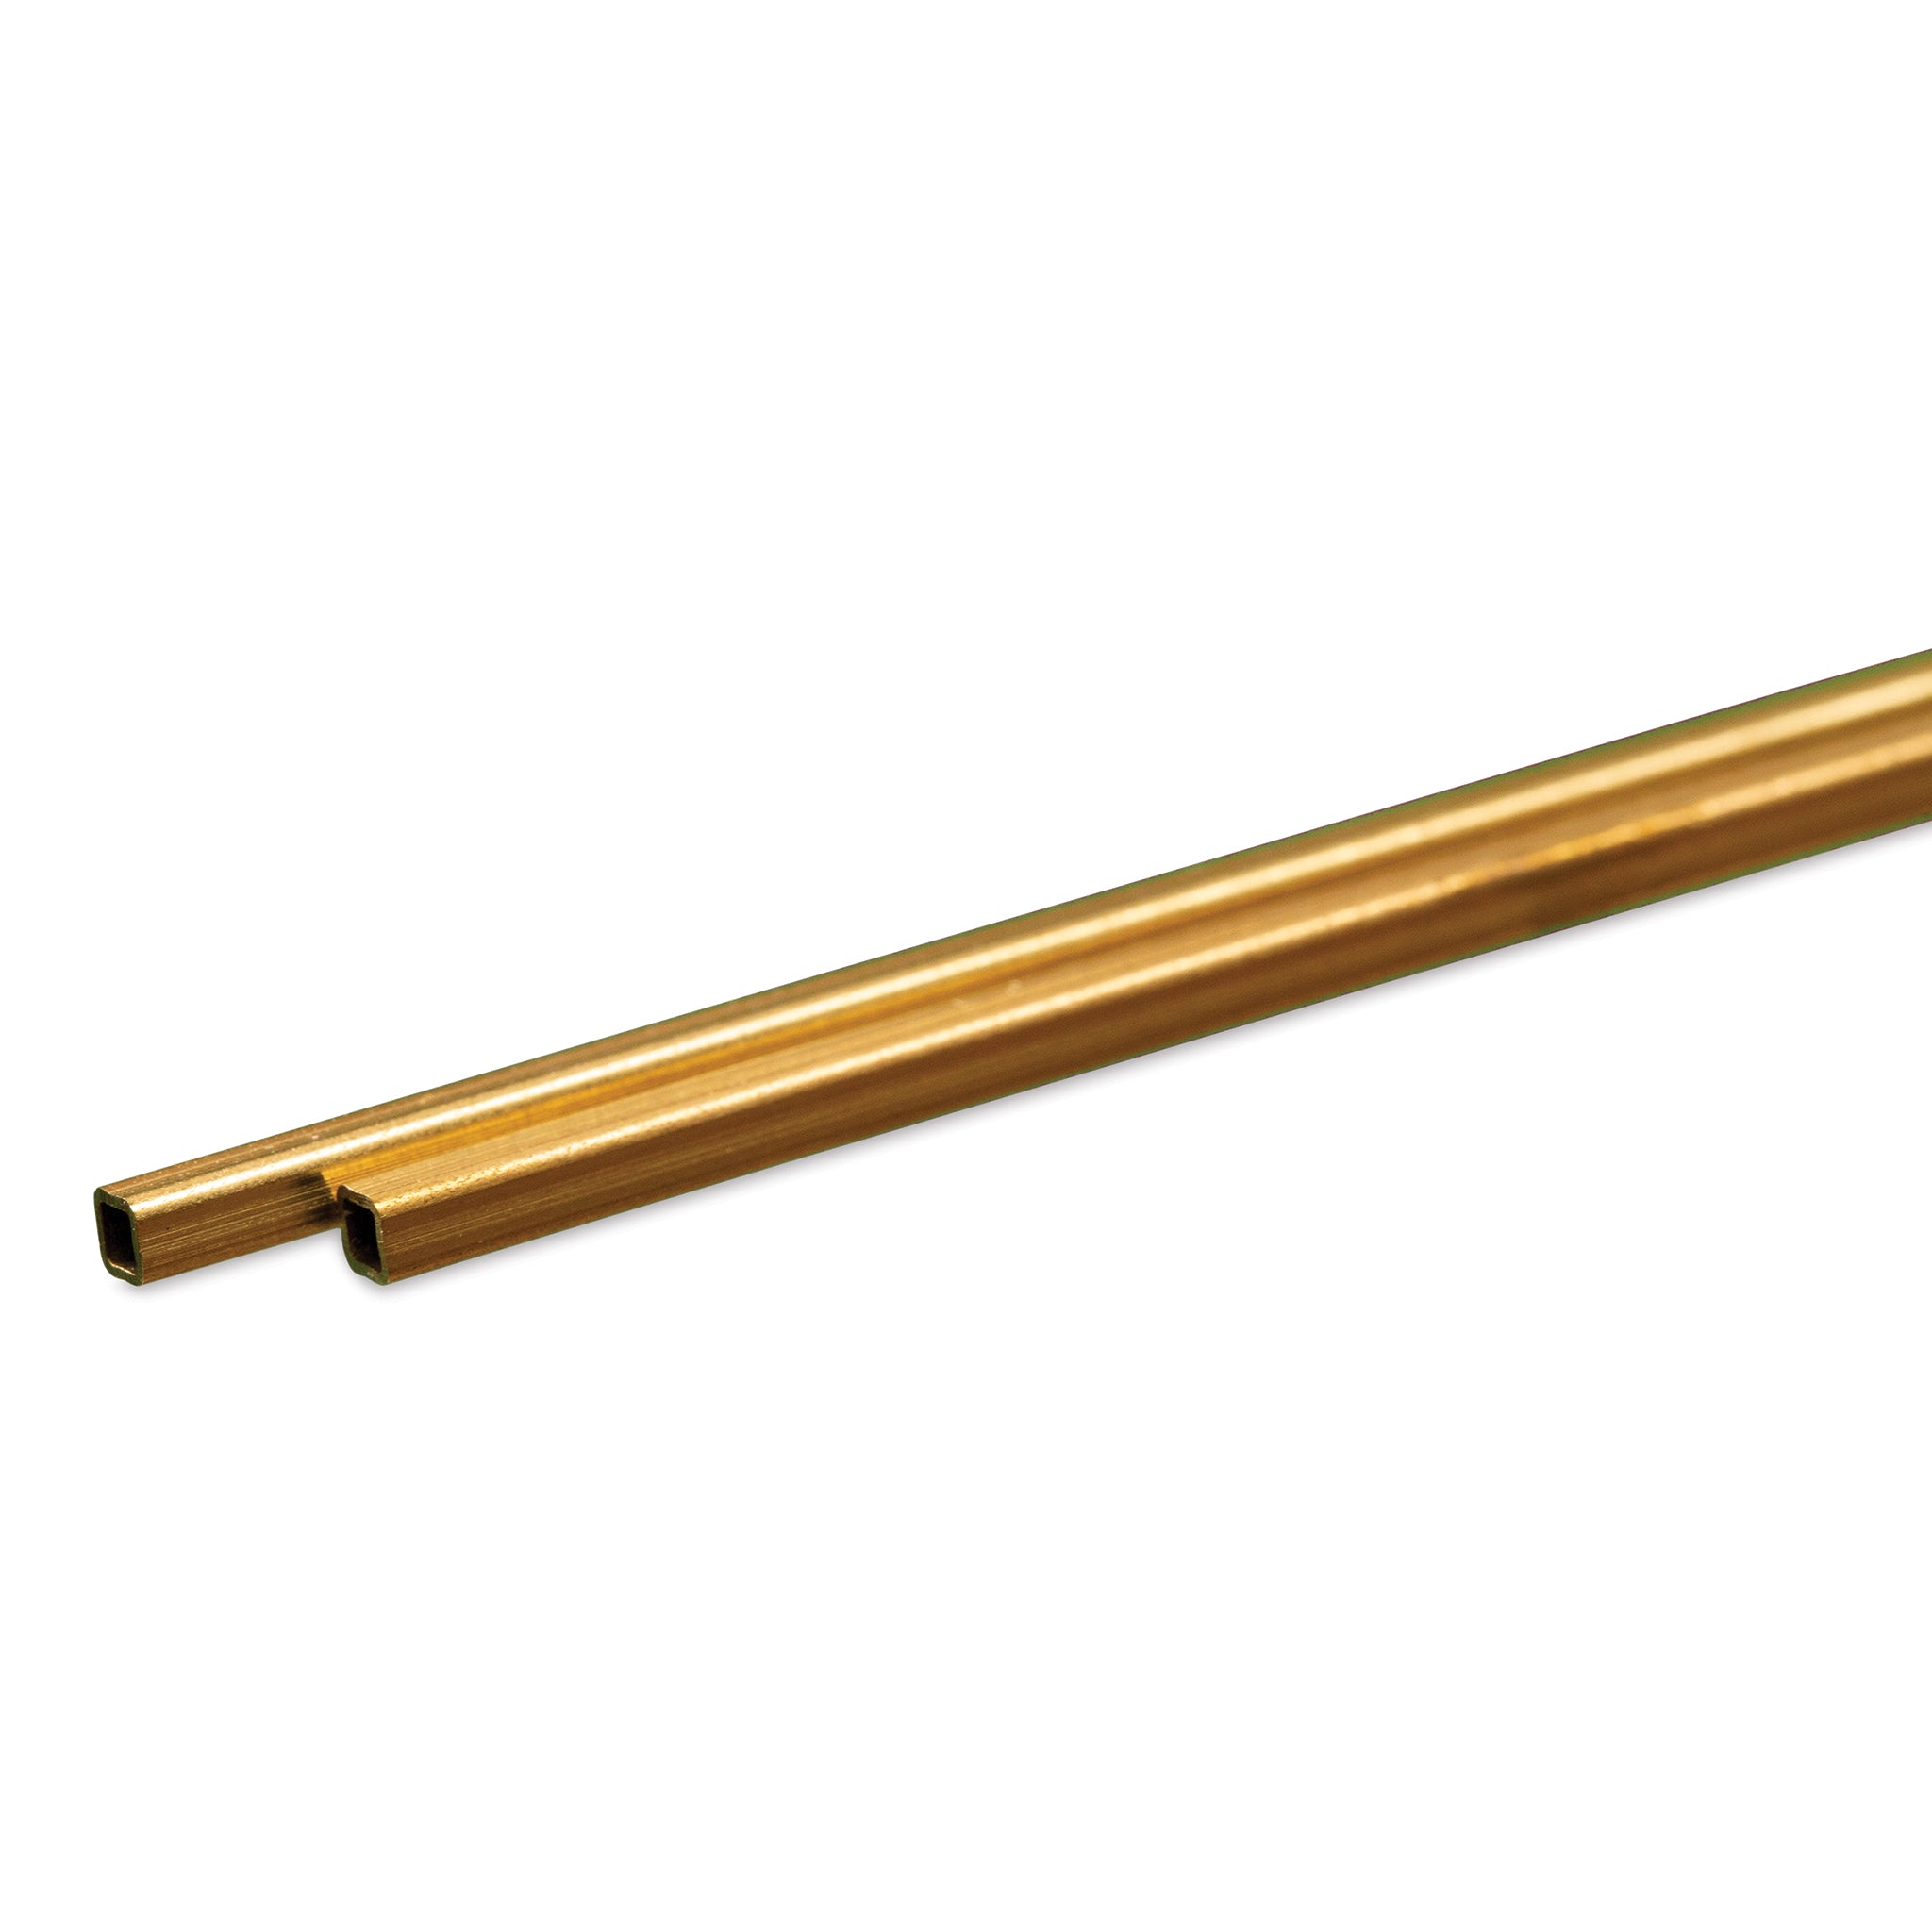 K&S Metals 8150 Square Brass Tube 3/32" SQ x 0.014" Wall x 12" Long (2 Pieces)